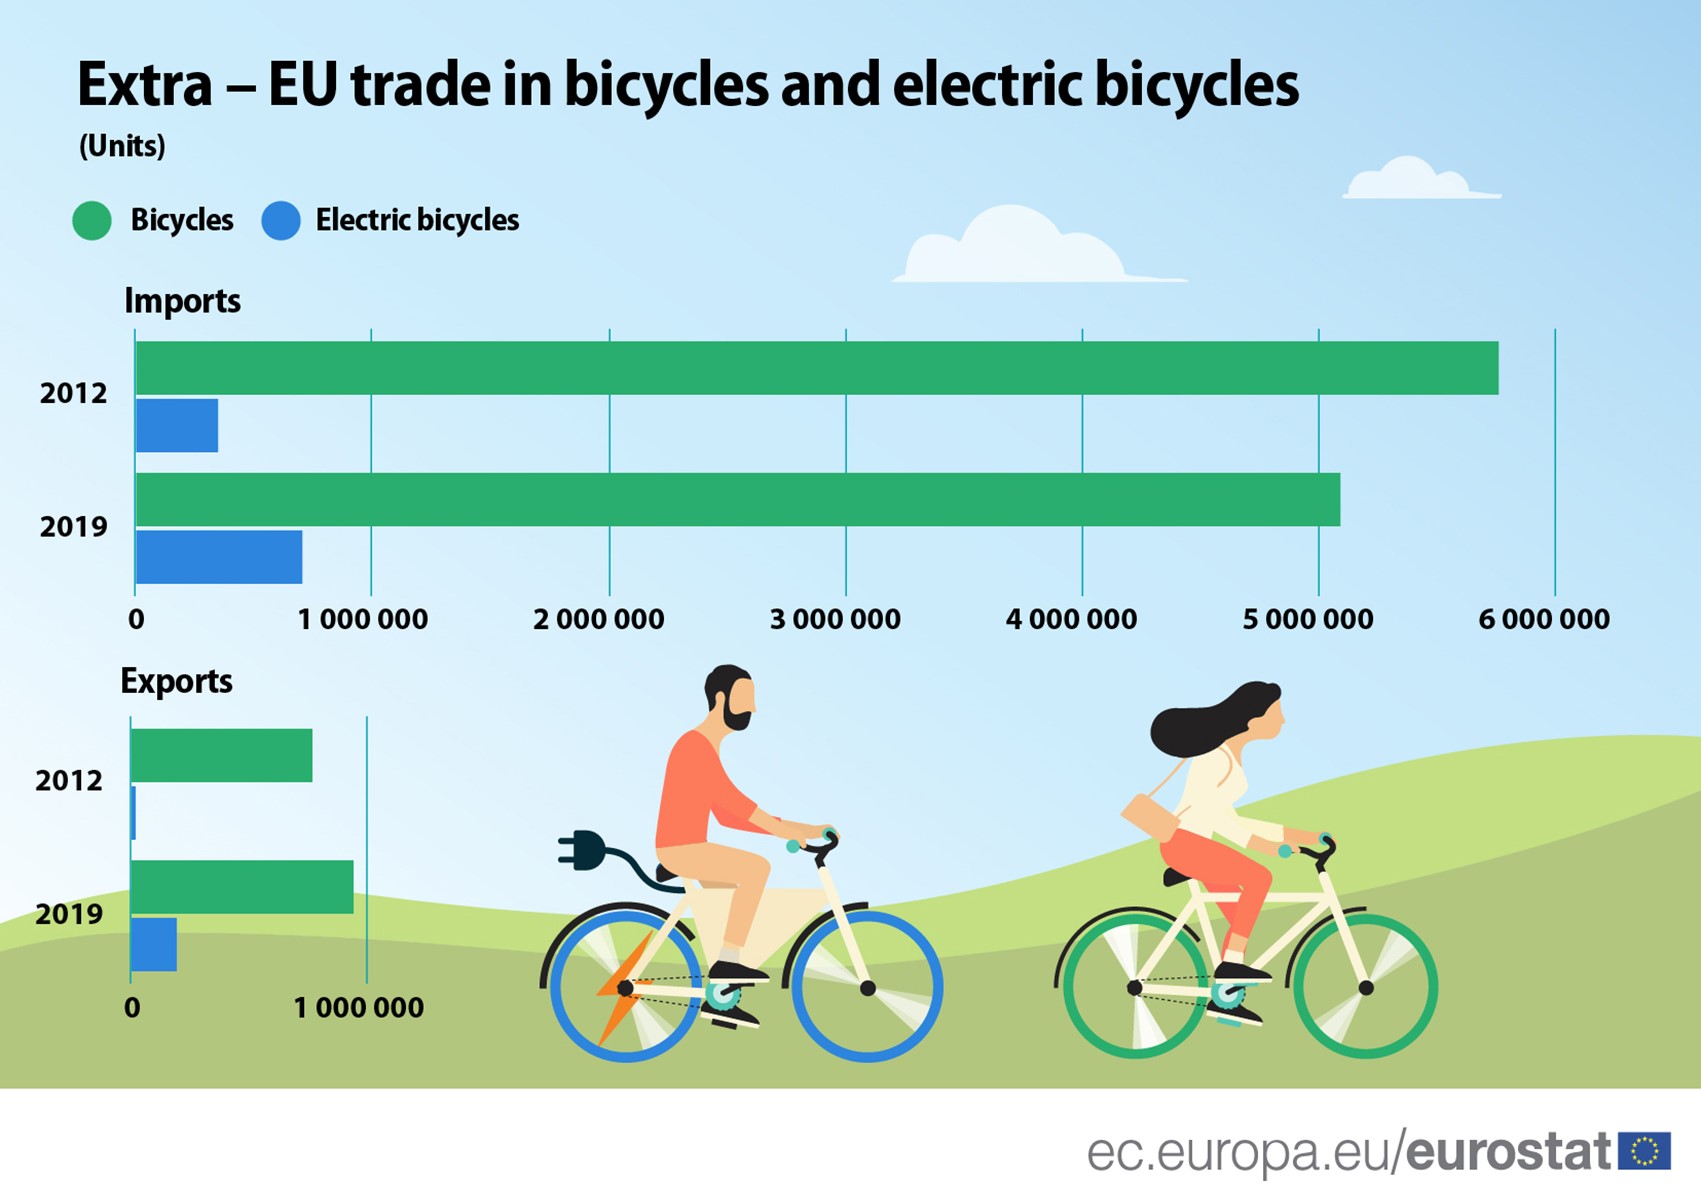  EU trade in bicycles and electric bicycles 